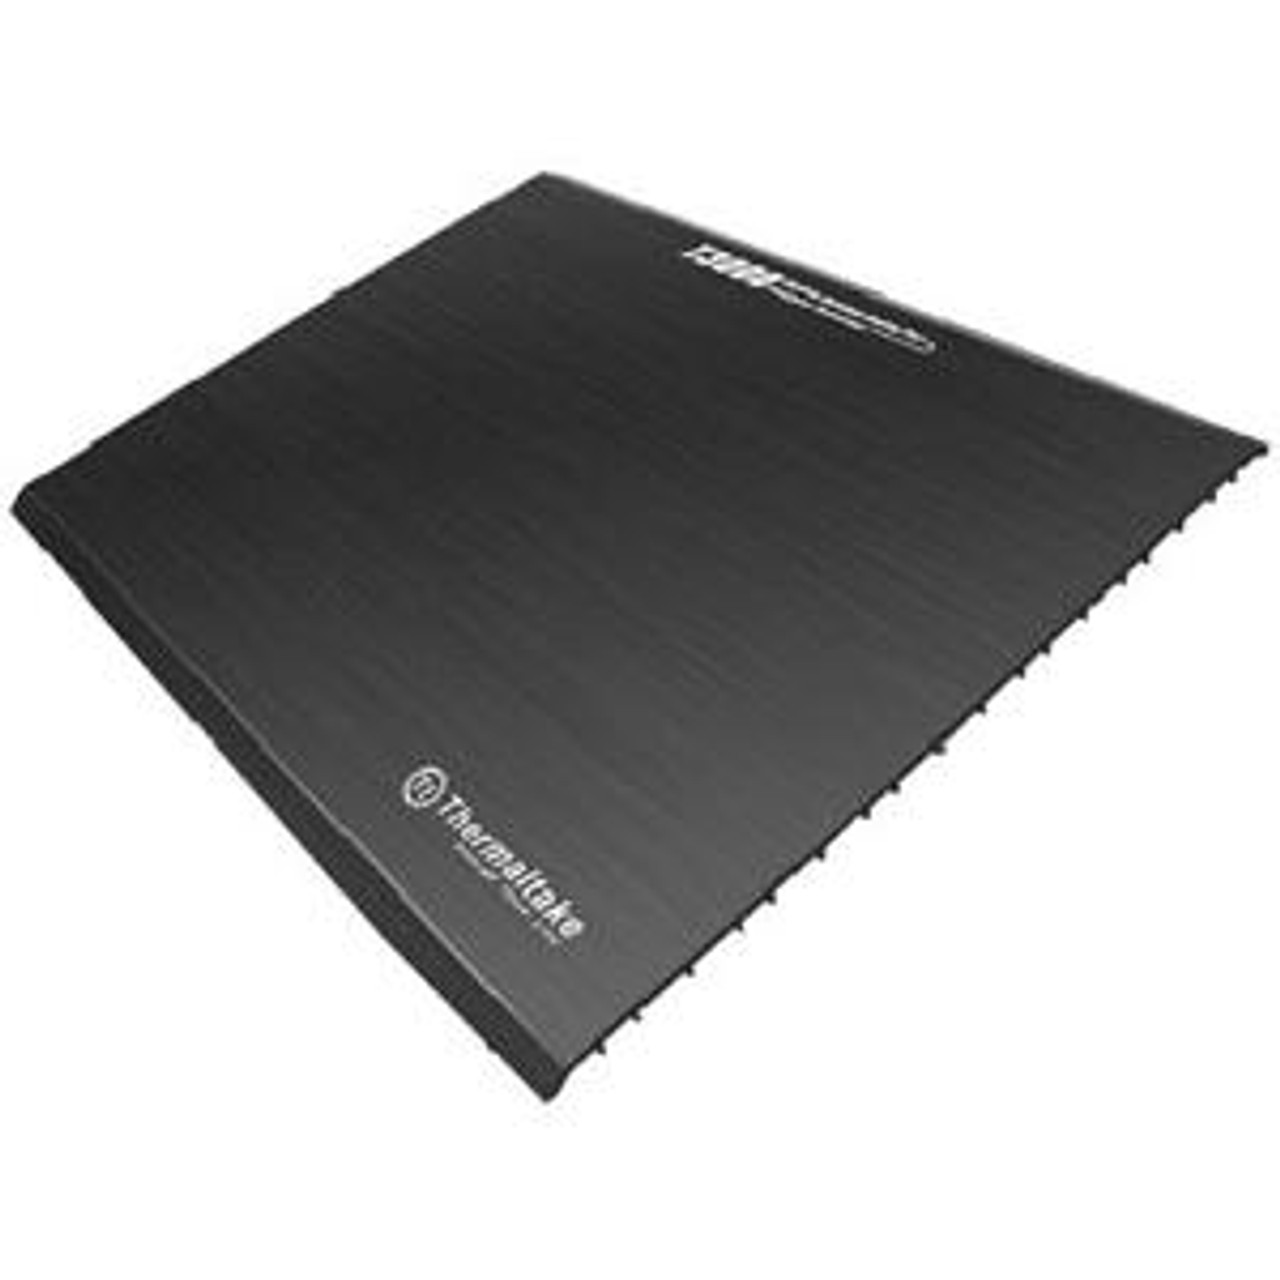 R14AN01 Thermaltake T3000 Notebook Cooling Pad